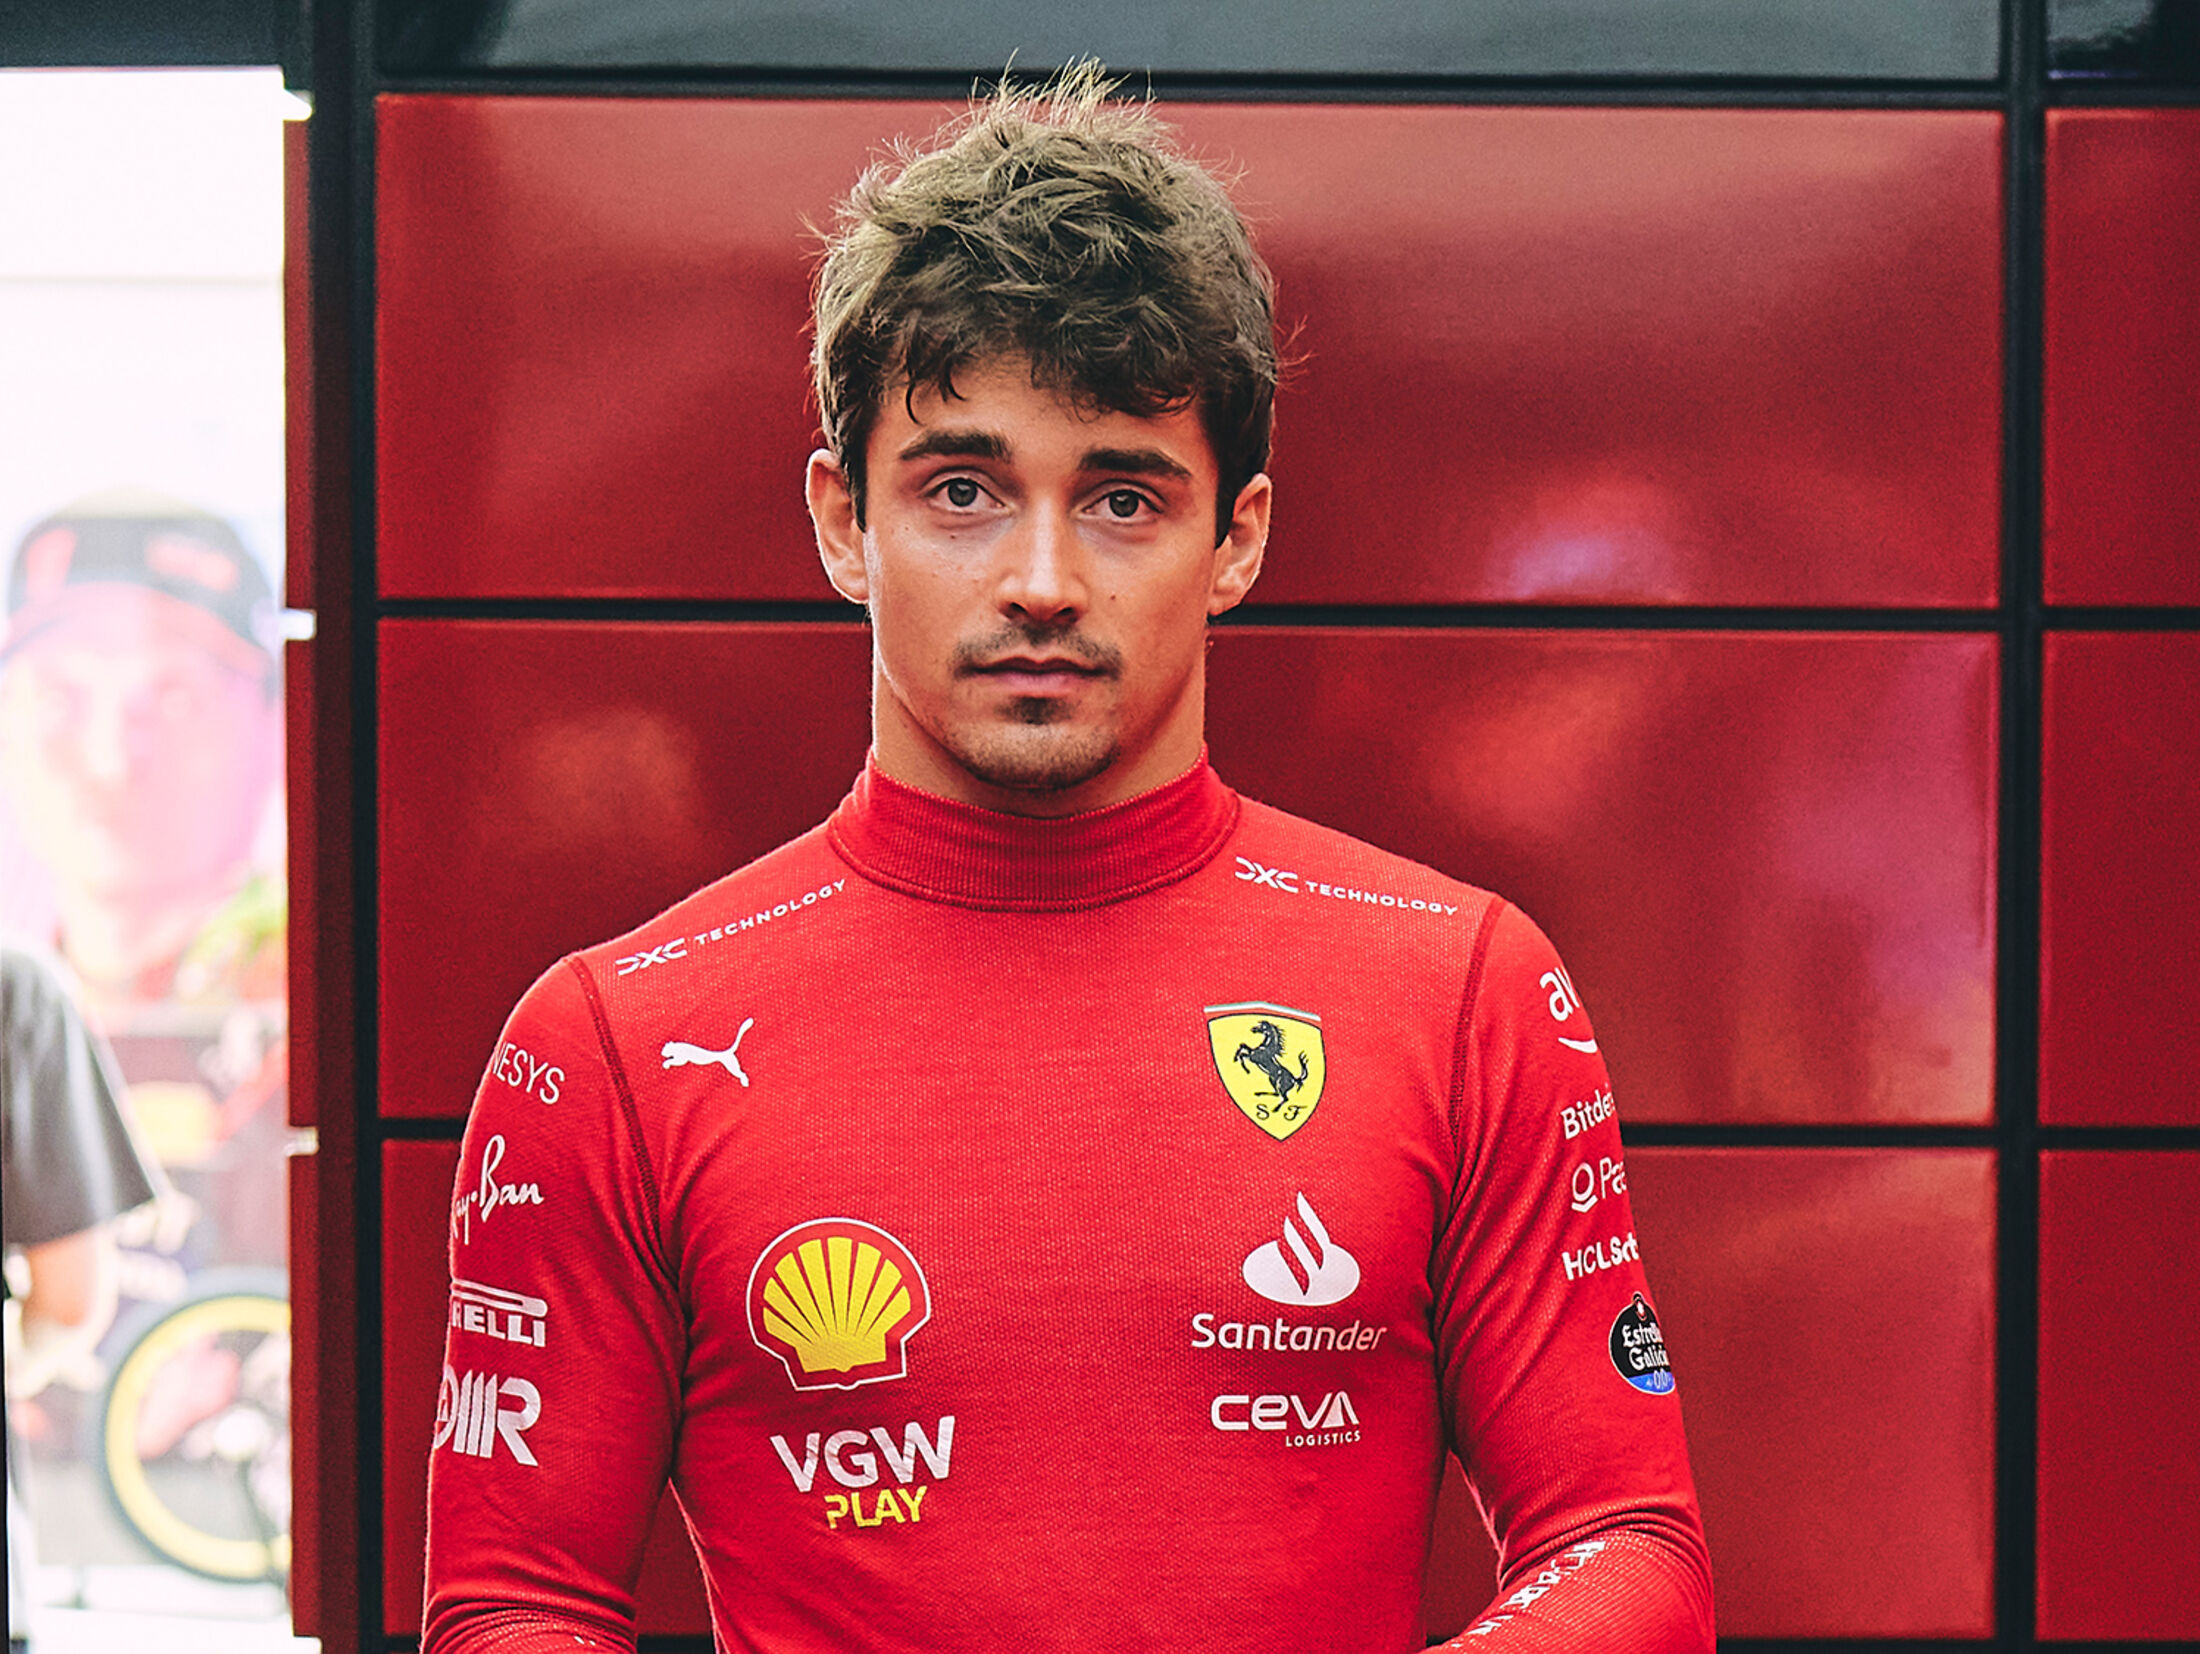 Charles Leclerc im Interview